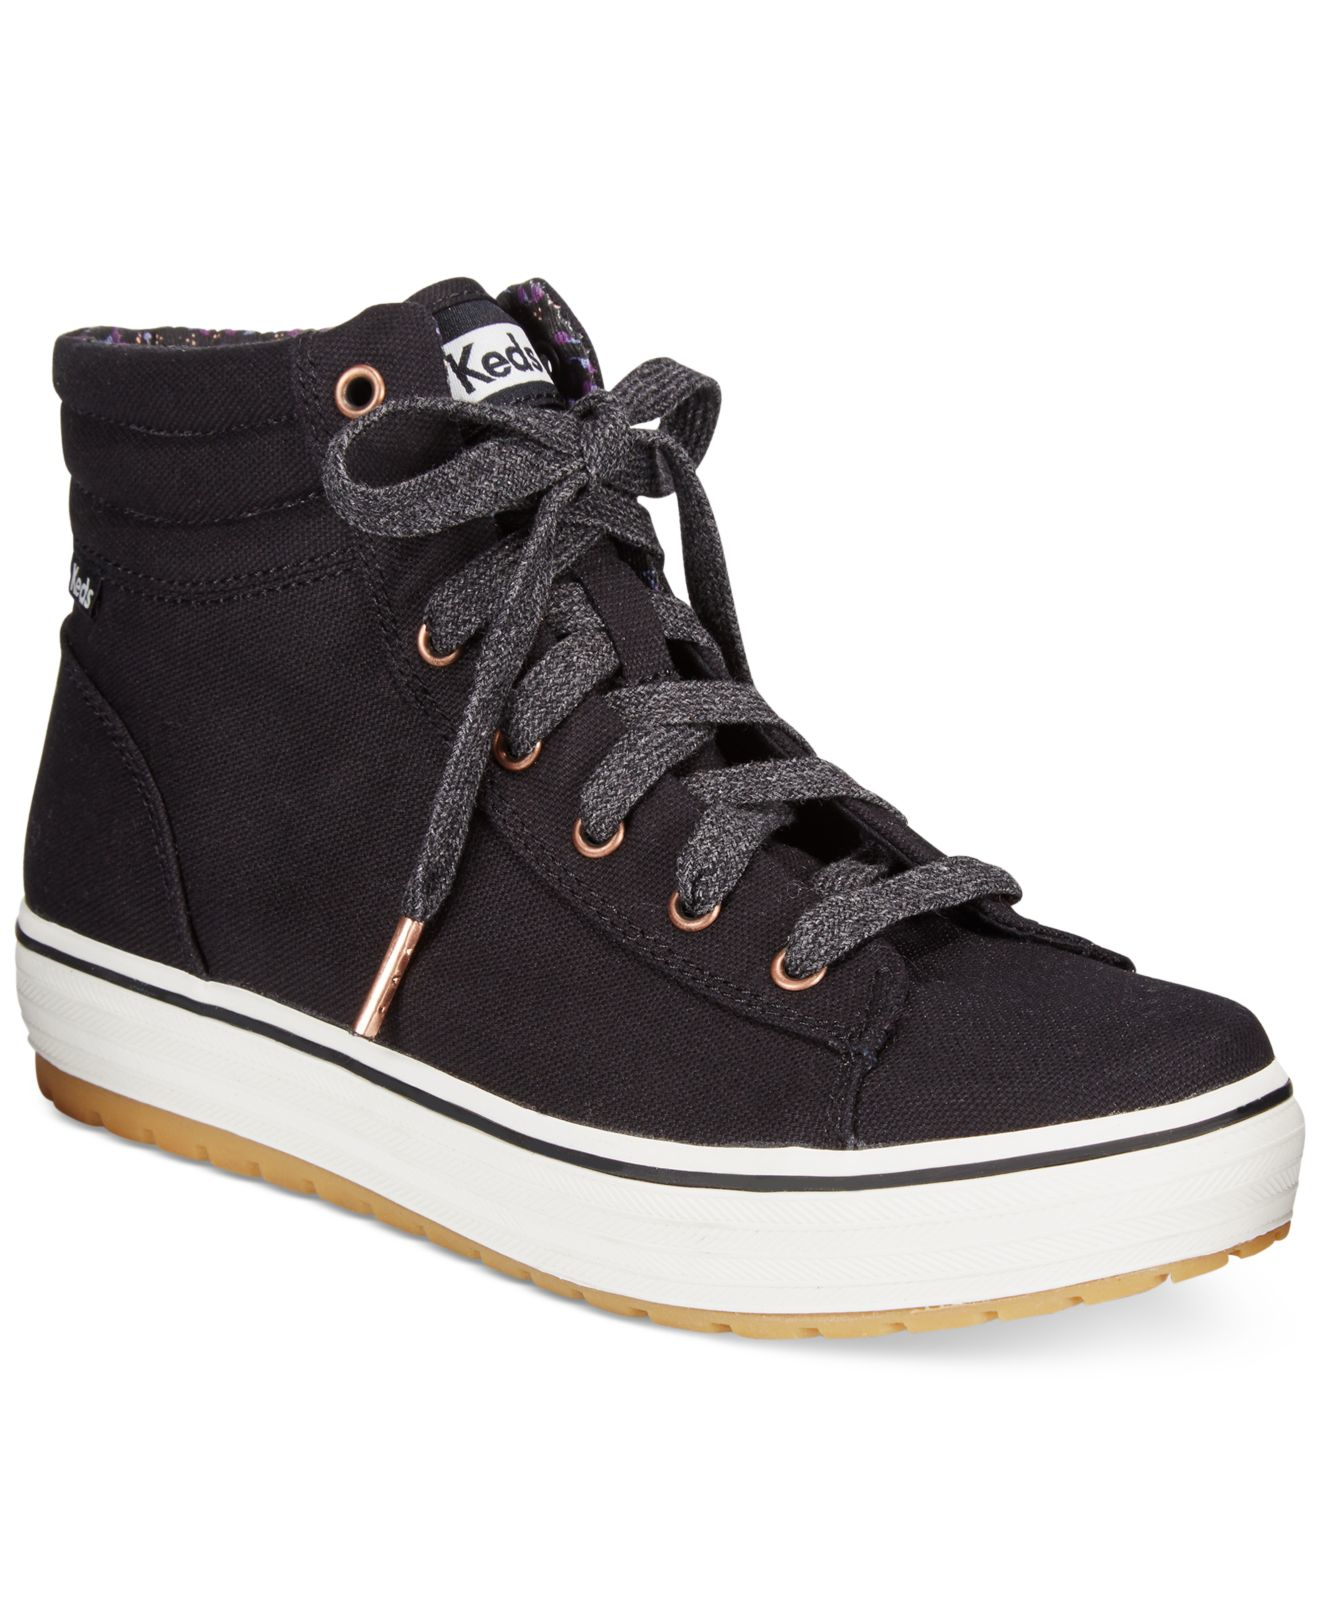 Keds Women's High Rise High Top Sneakers in Black - Lyst